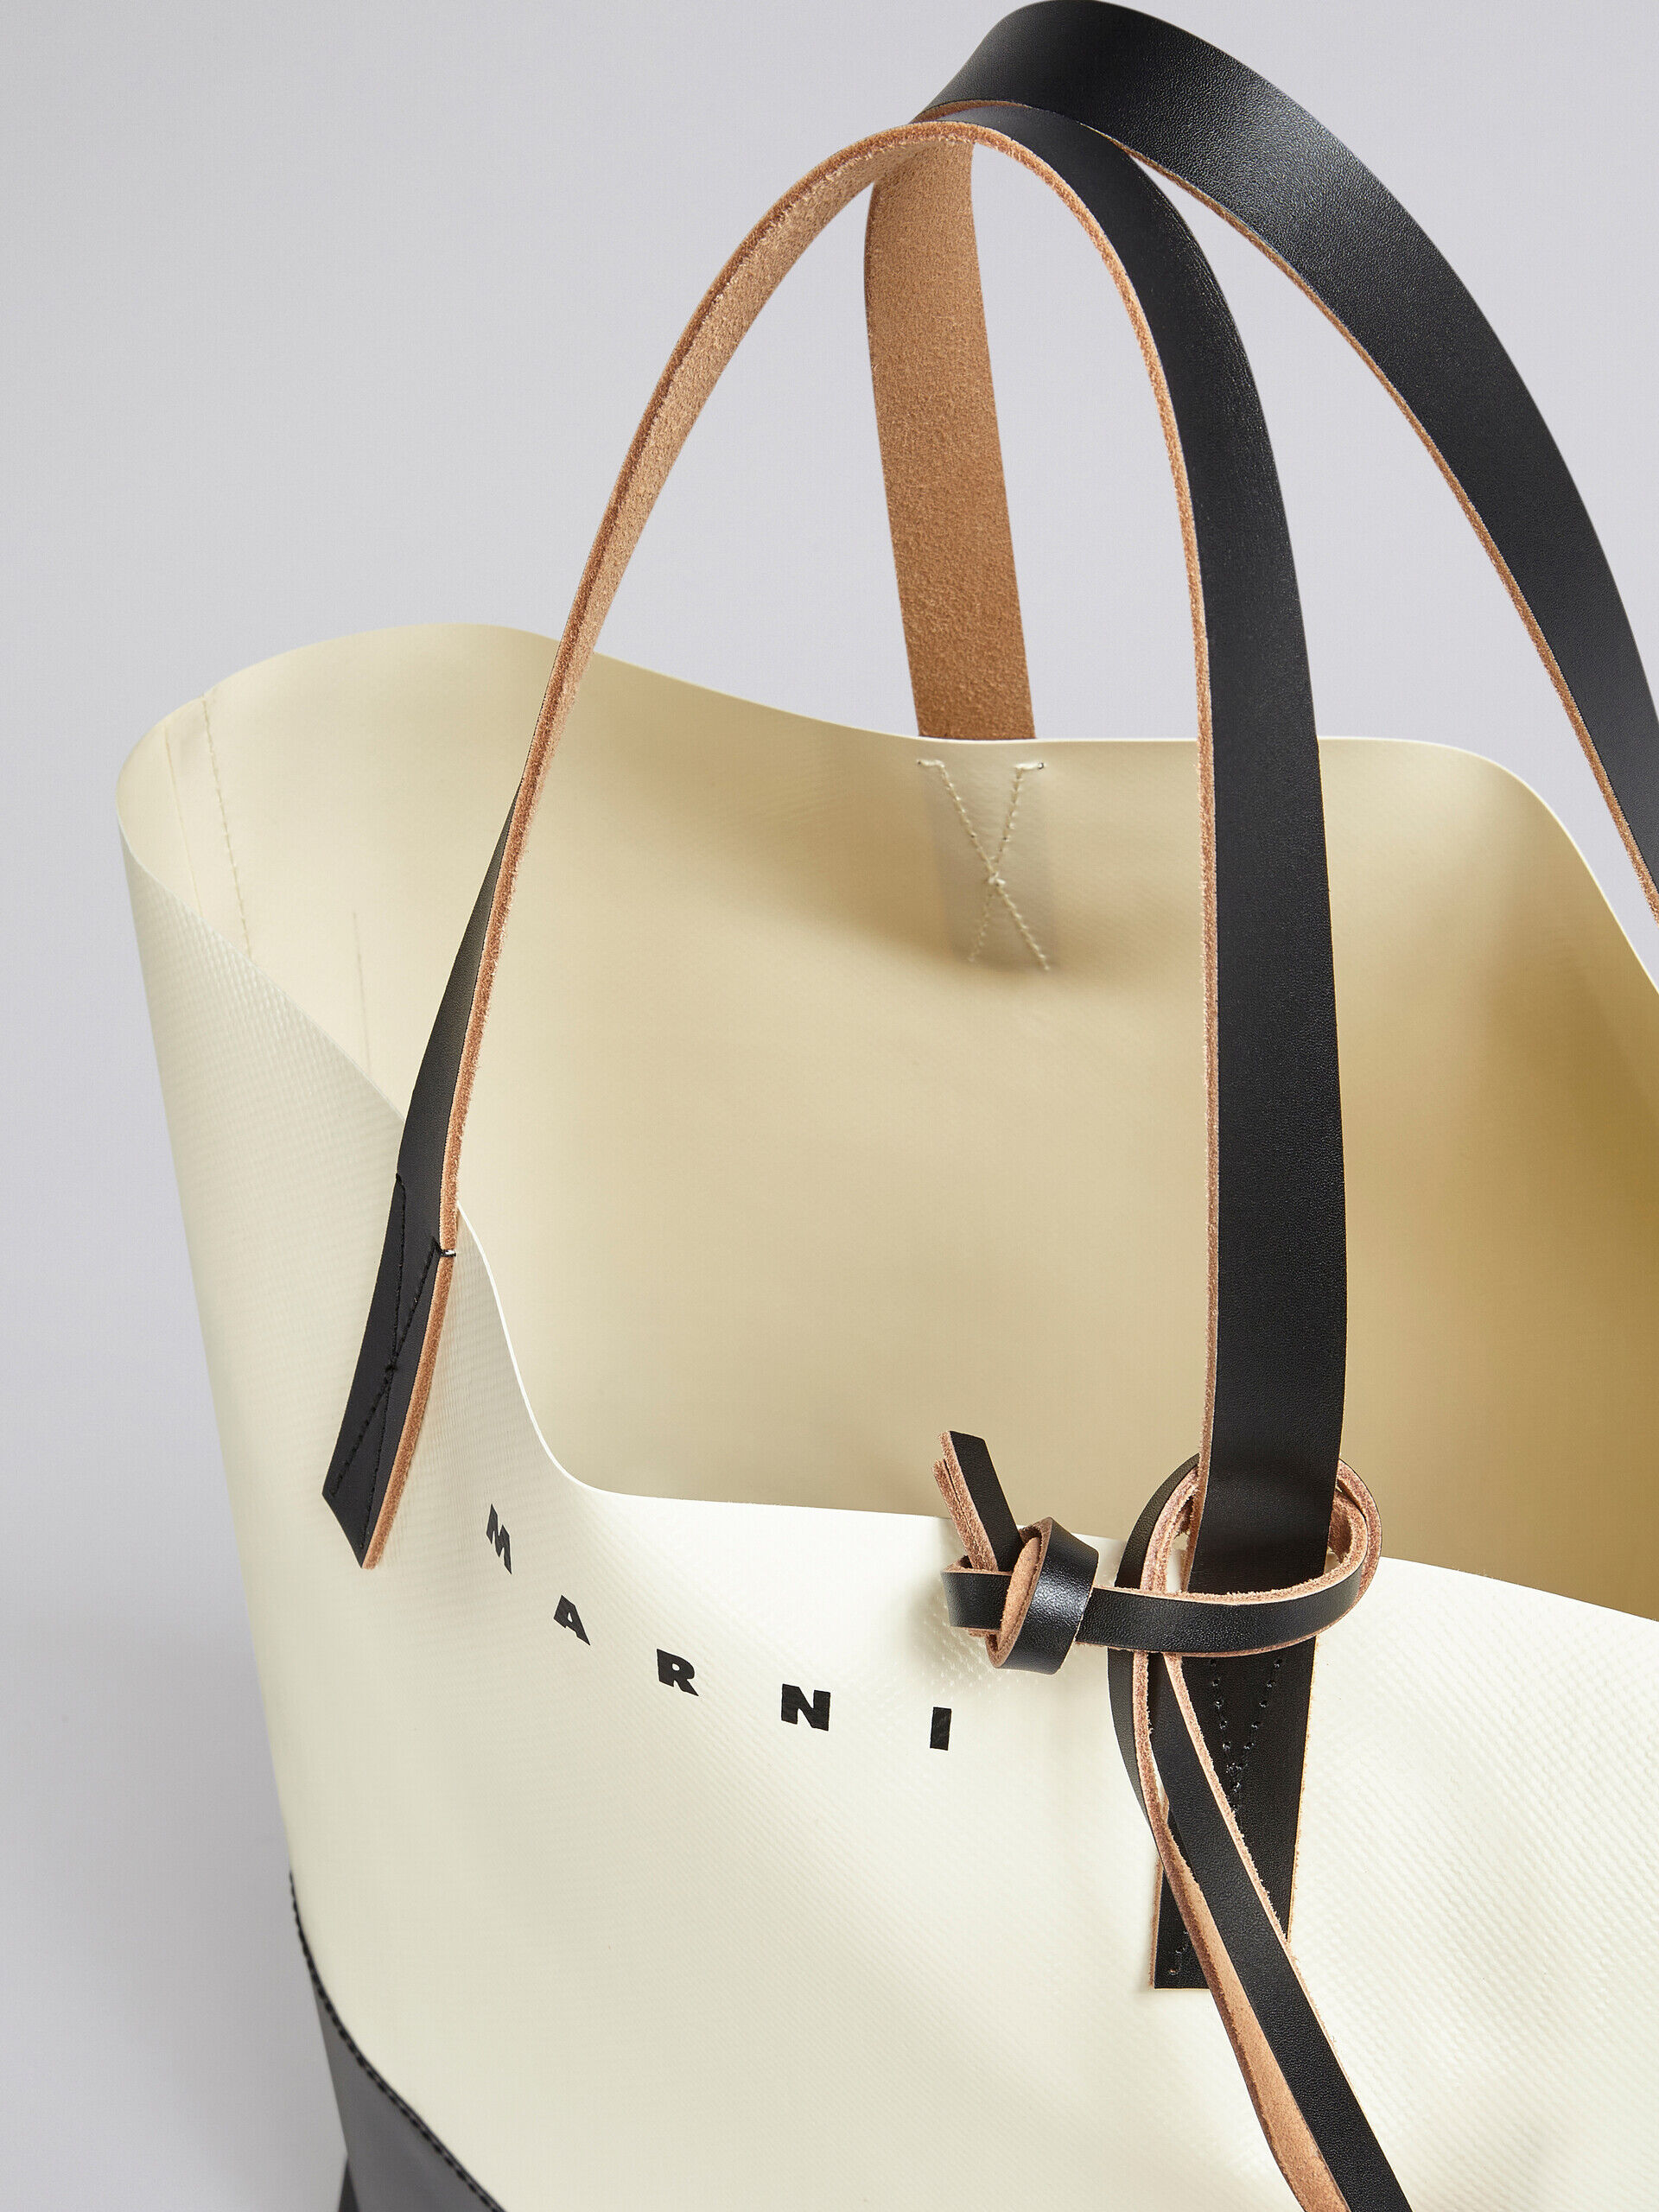 Tribeca shopping bag in white and black | Marni